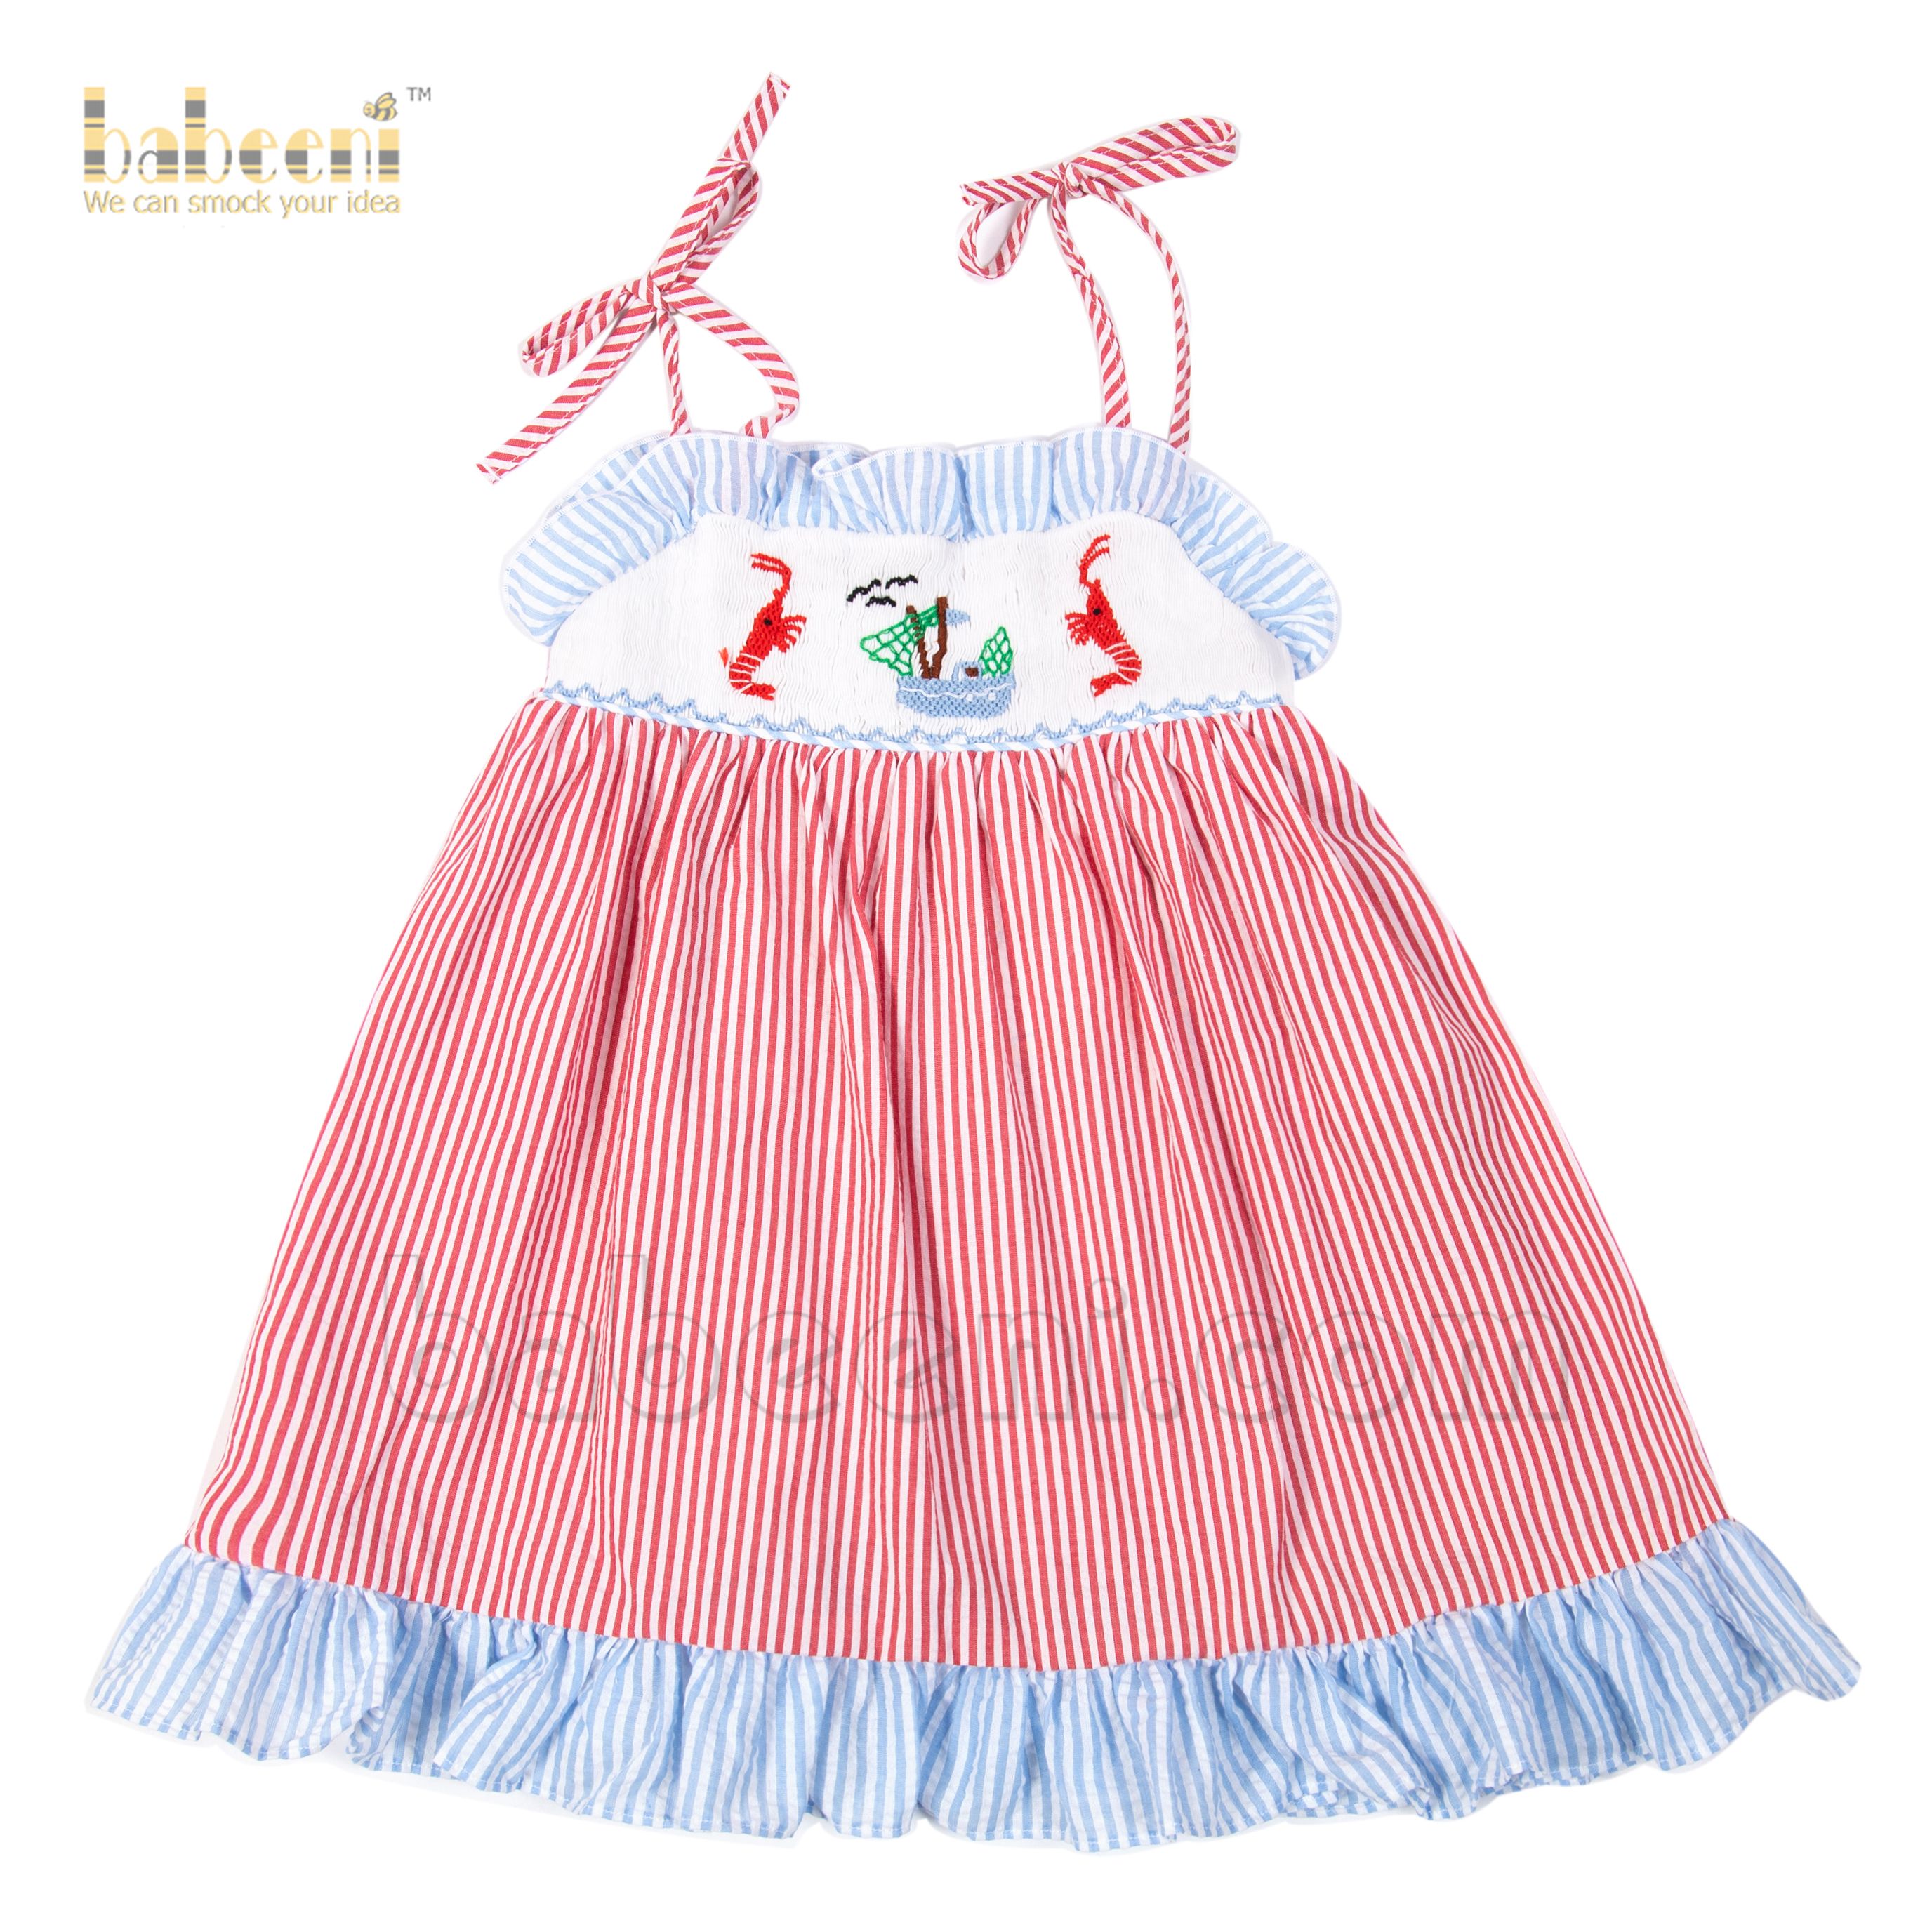 Lovely red striped girl dress with smocked shrimp and boat - DR 3088